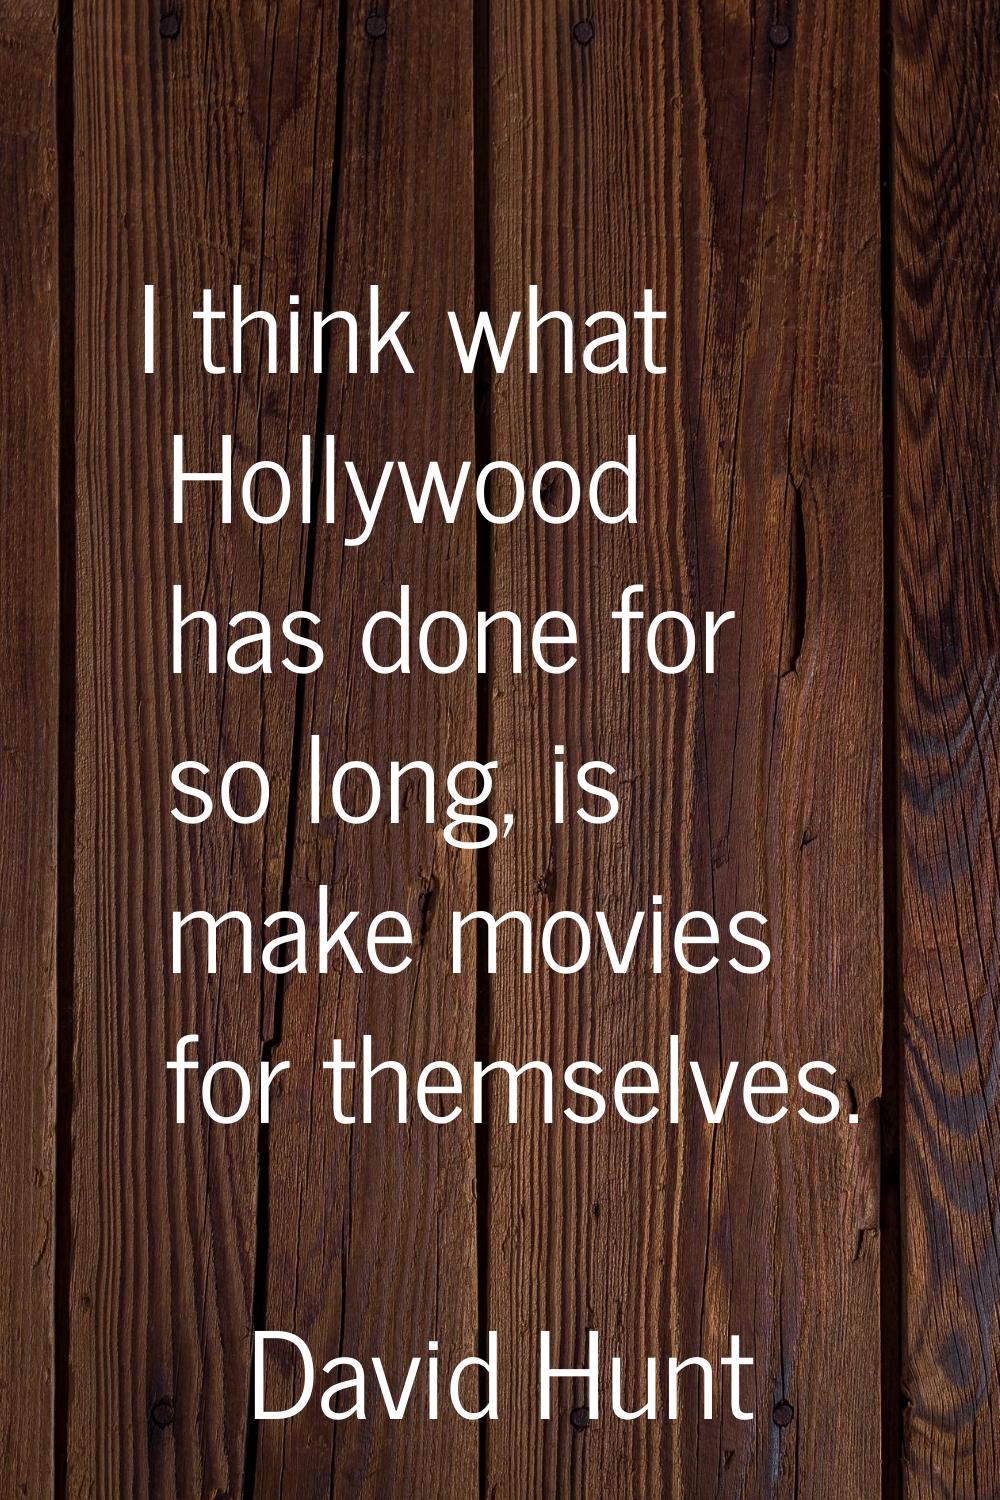 I think what Hollywood has done for so long, is make movies for themselves.